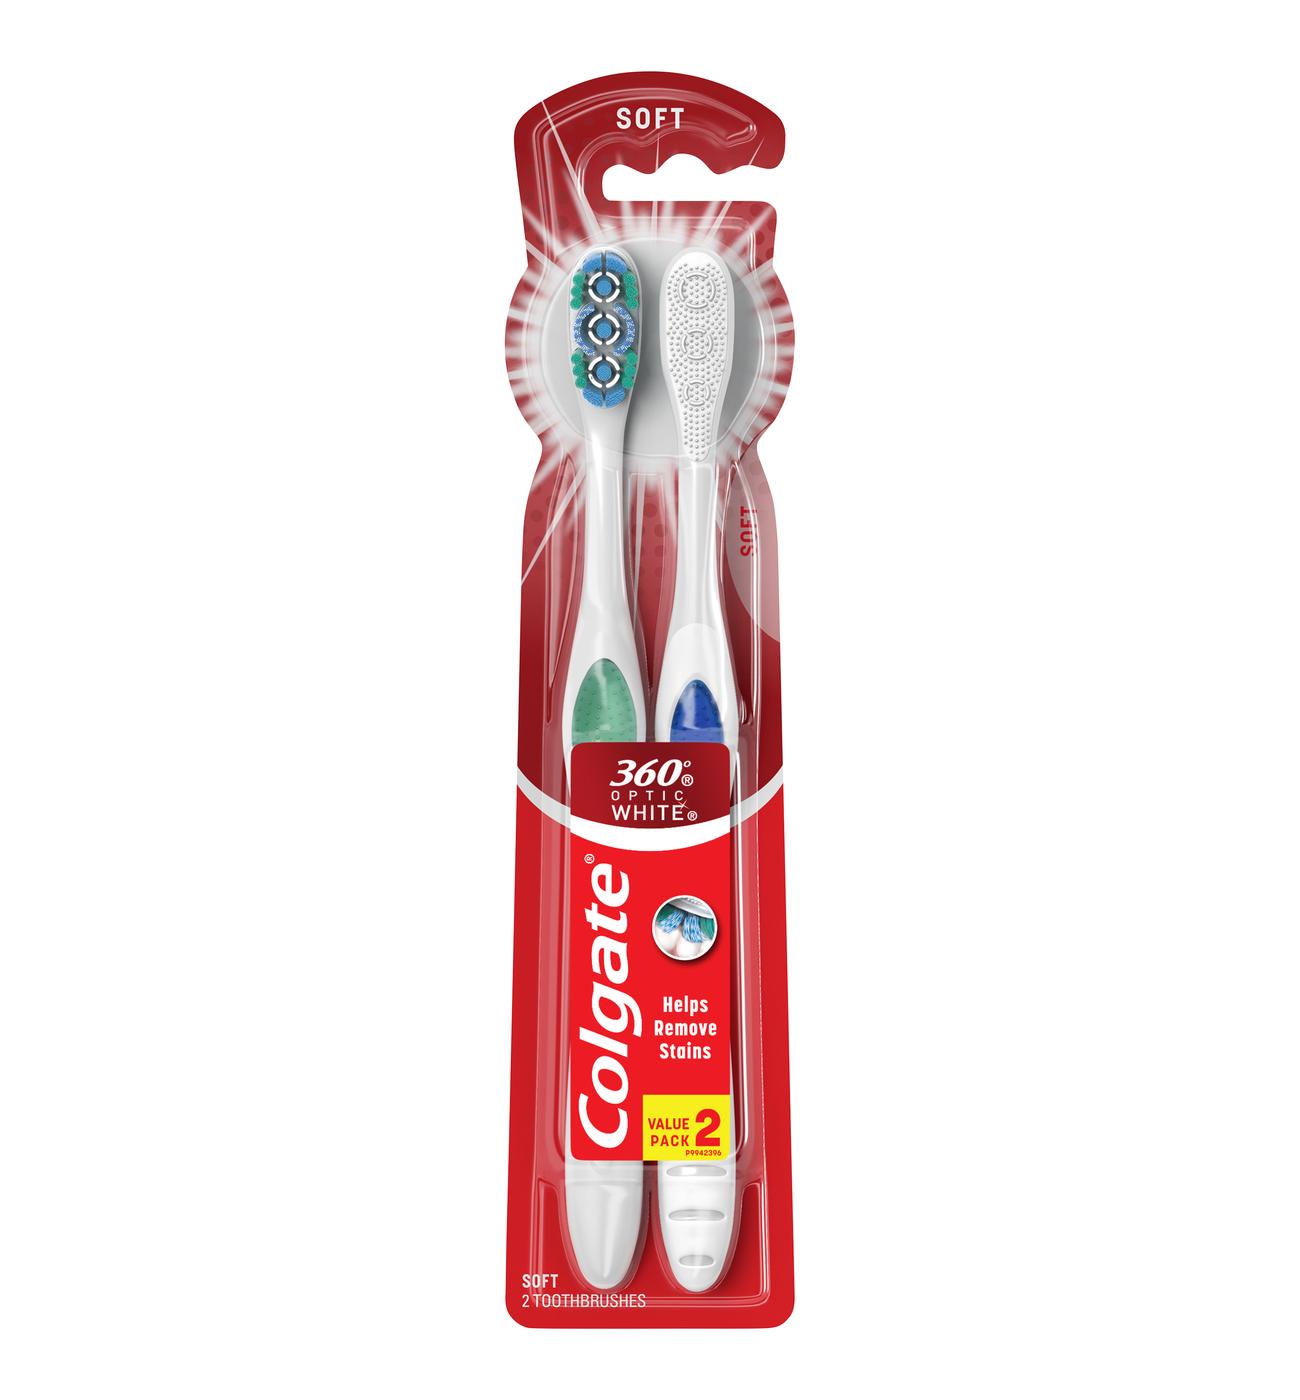 Colgate 360 Optic White Toothbrushes - Soft; image 1 of 11